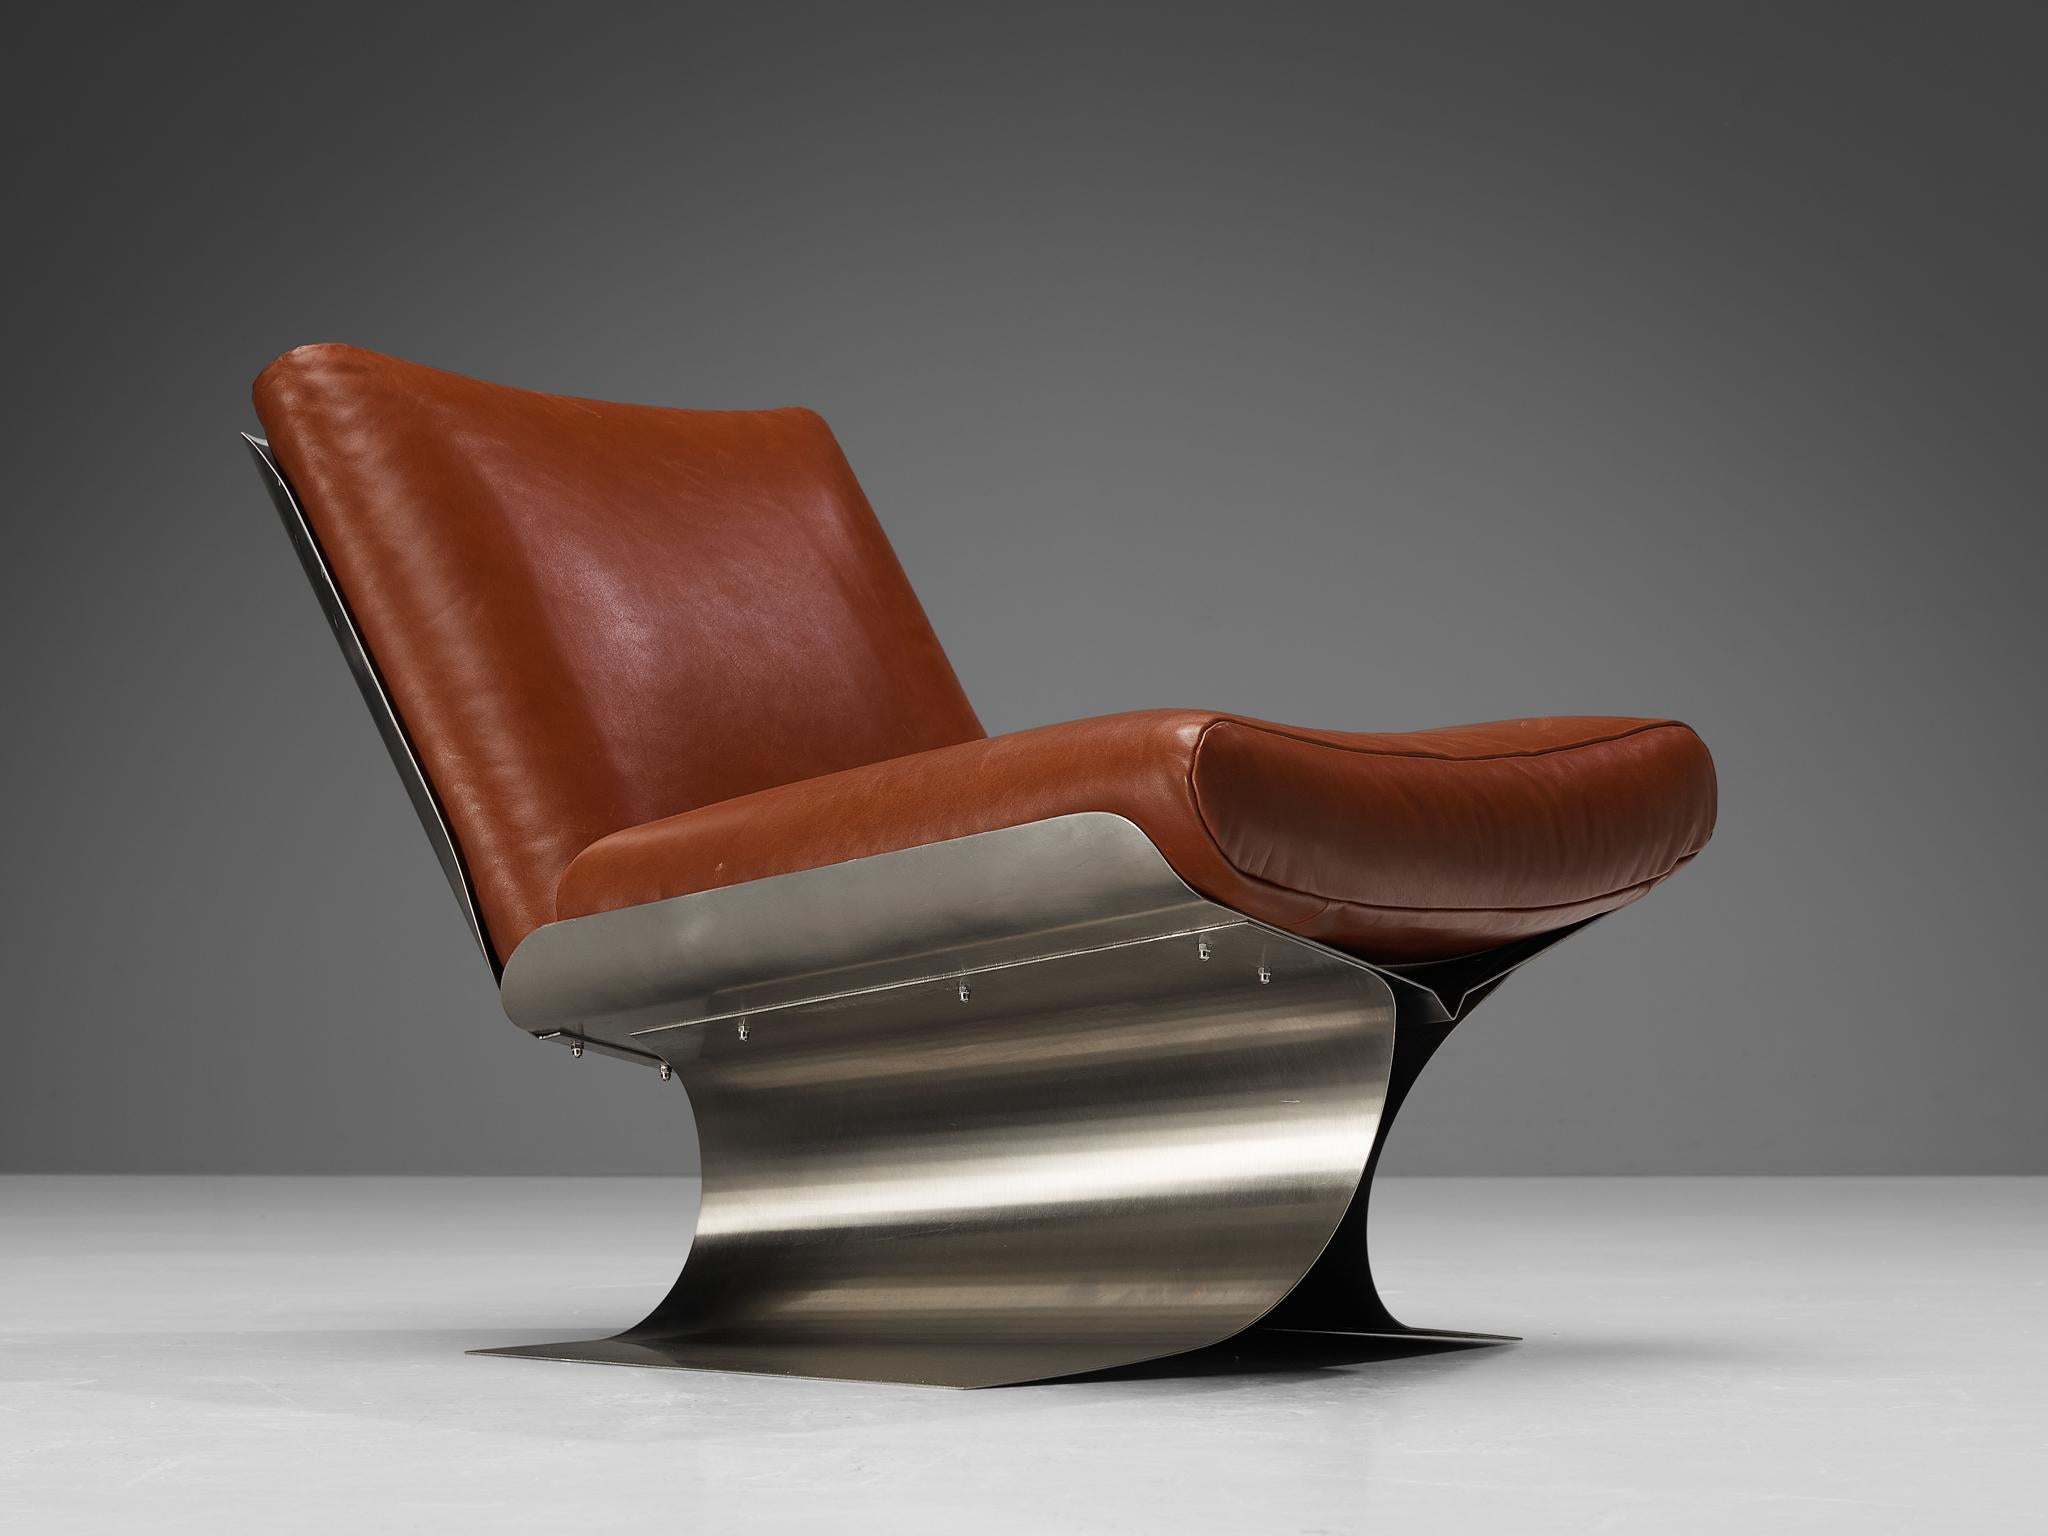 Xavier Féal, lounge chair, brushed steel, leather, France, ca. 1970

Rare lounge chair designed by French interior architect Xavier Féal in the 1970s. The smooth and sculptural chair is made of brushed steel, Féals signature material. The base has a